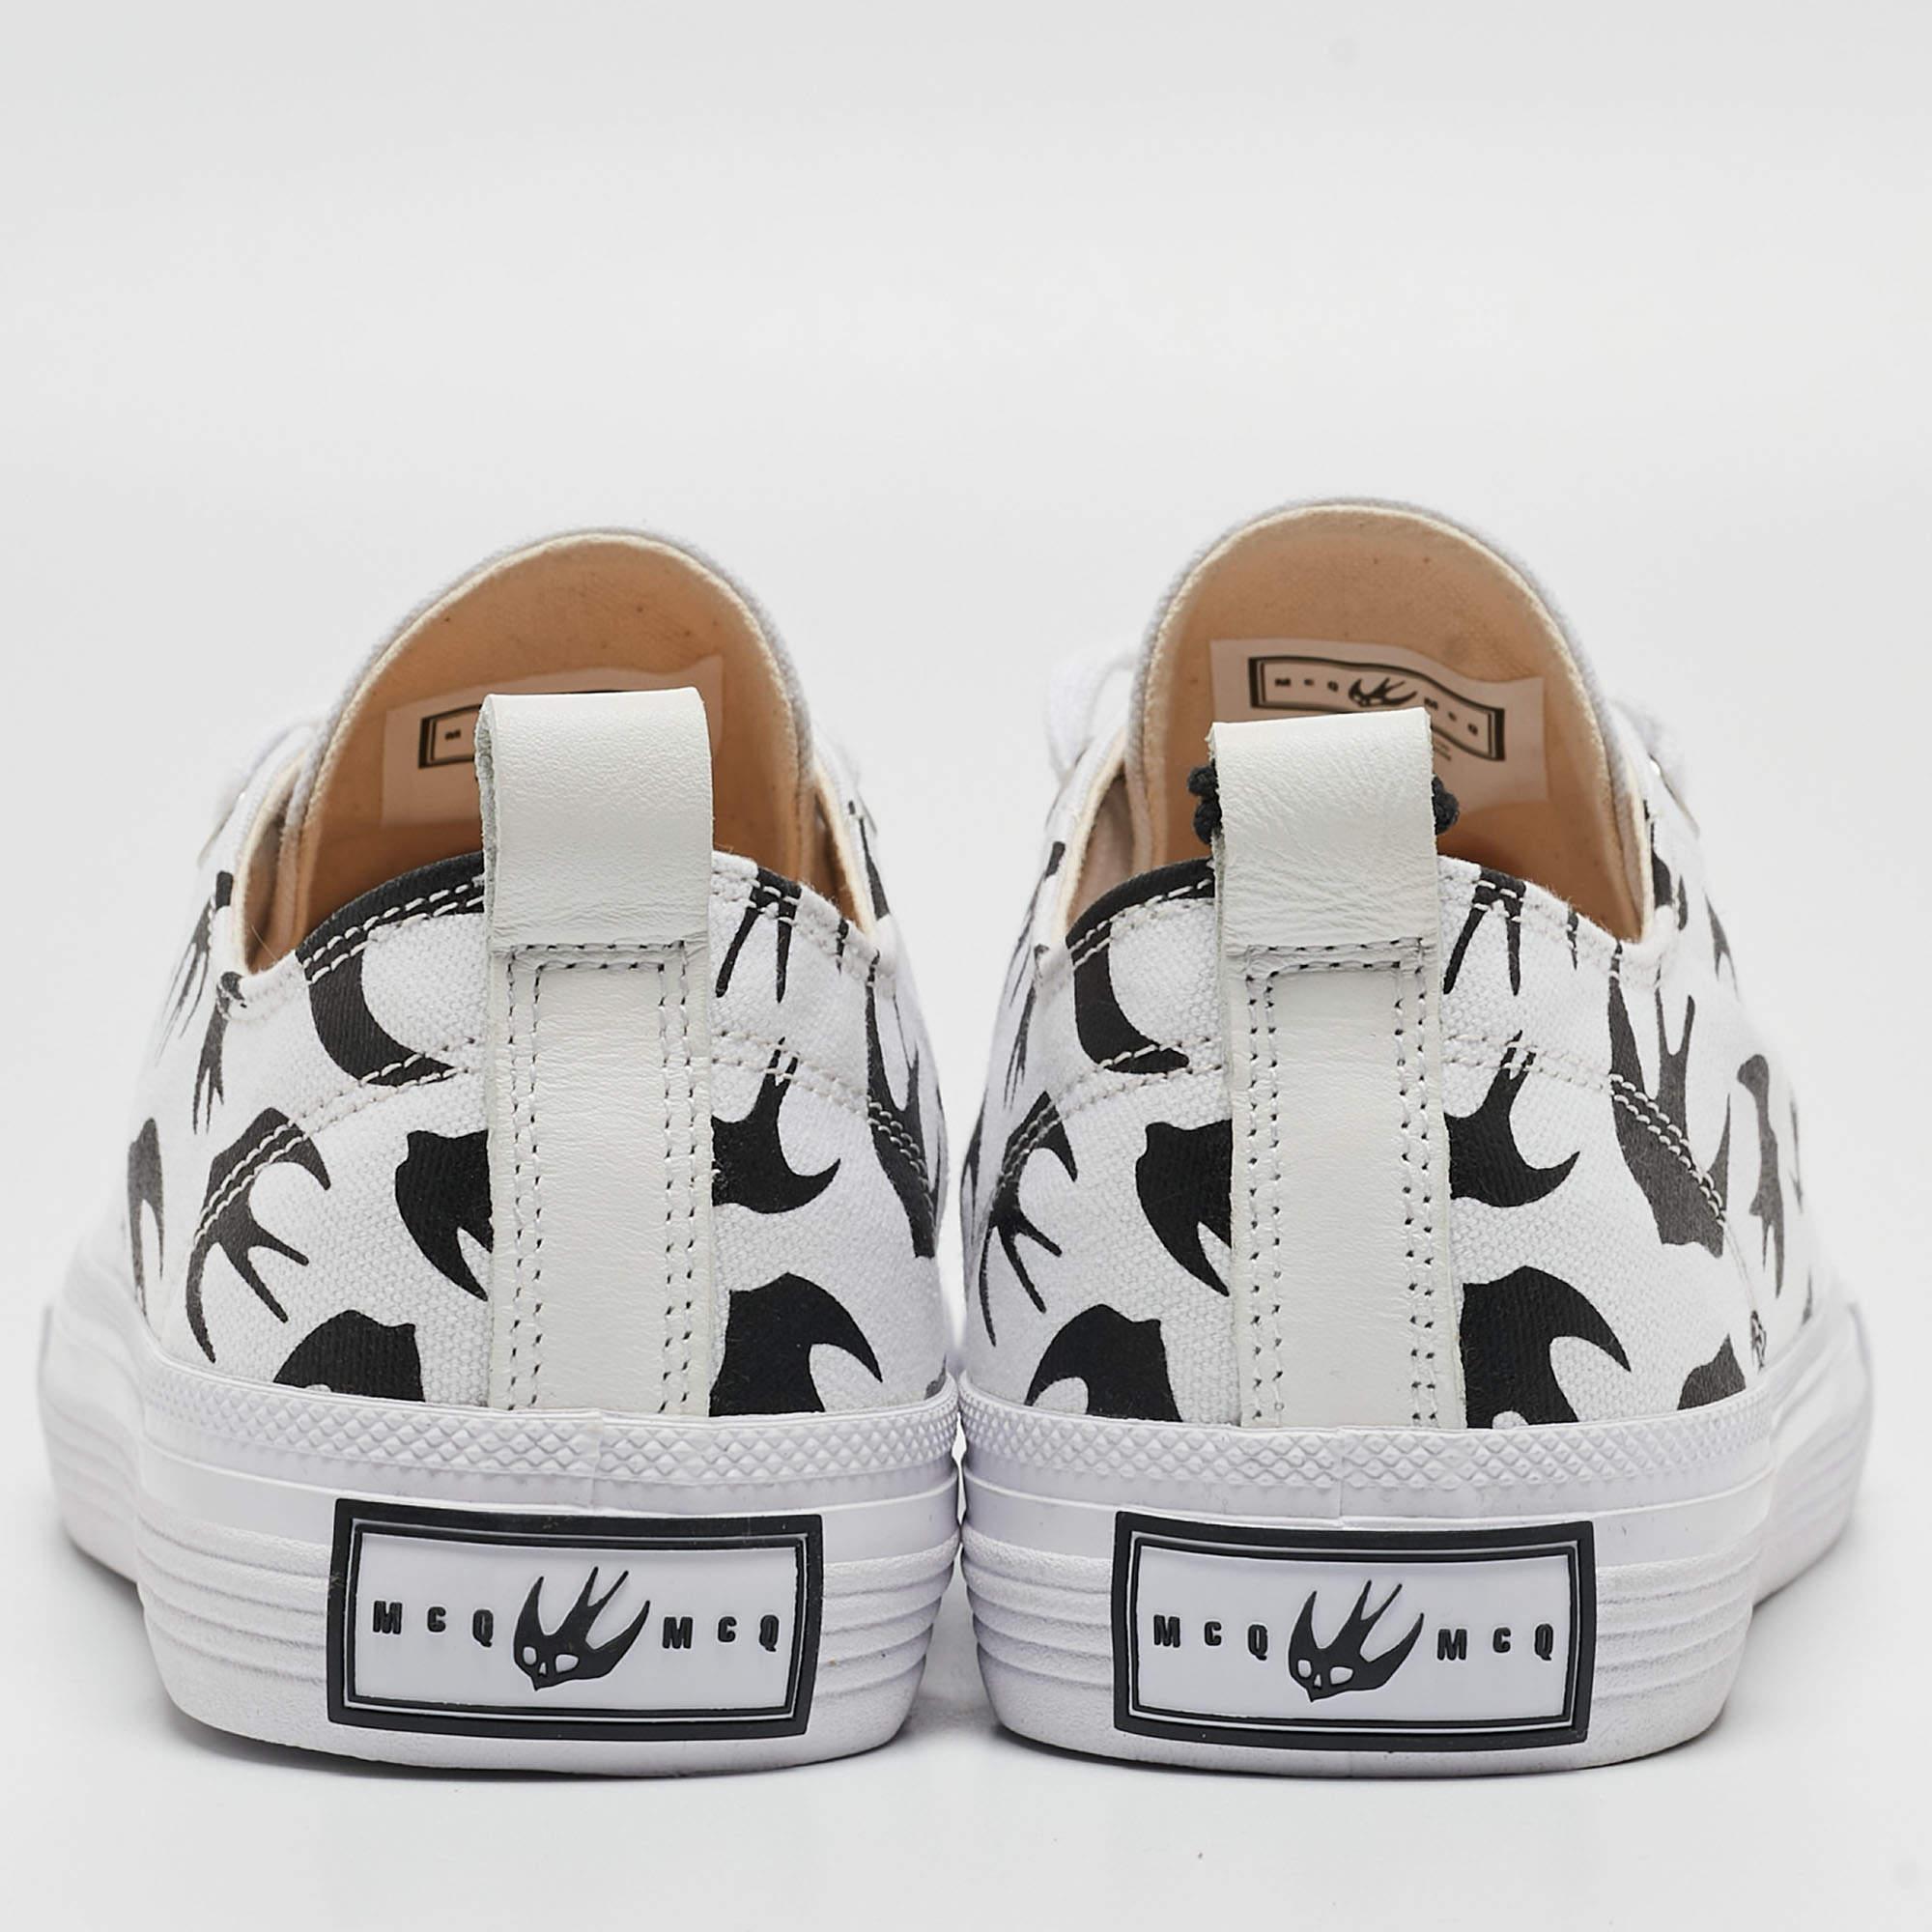 McQ by Alexander McQueen White/Black Canvas Shallow Swarm Sneakers Size 40 4